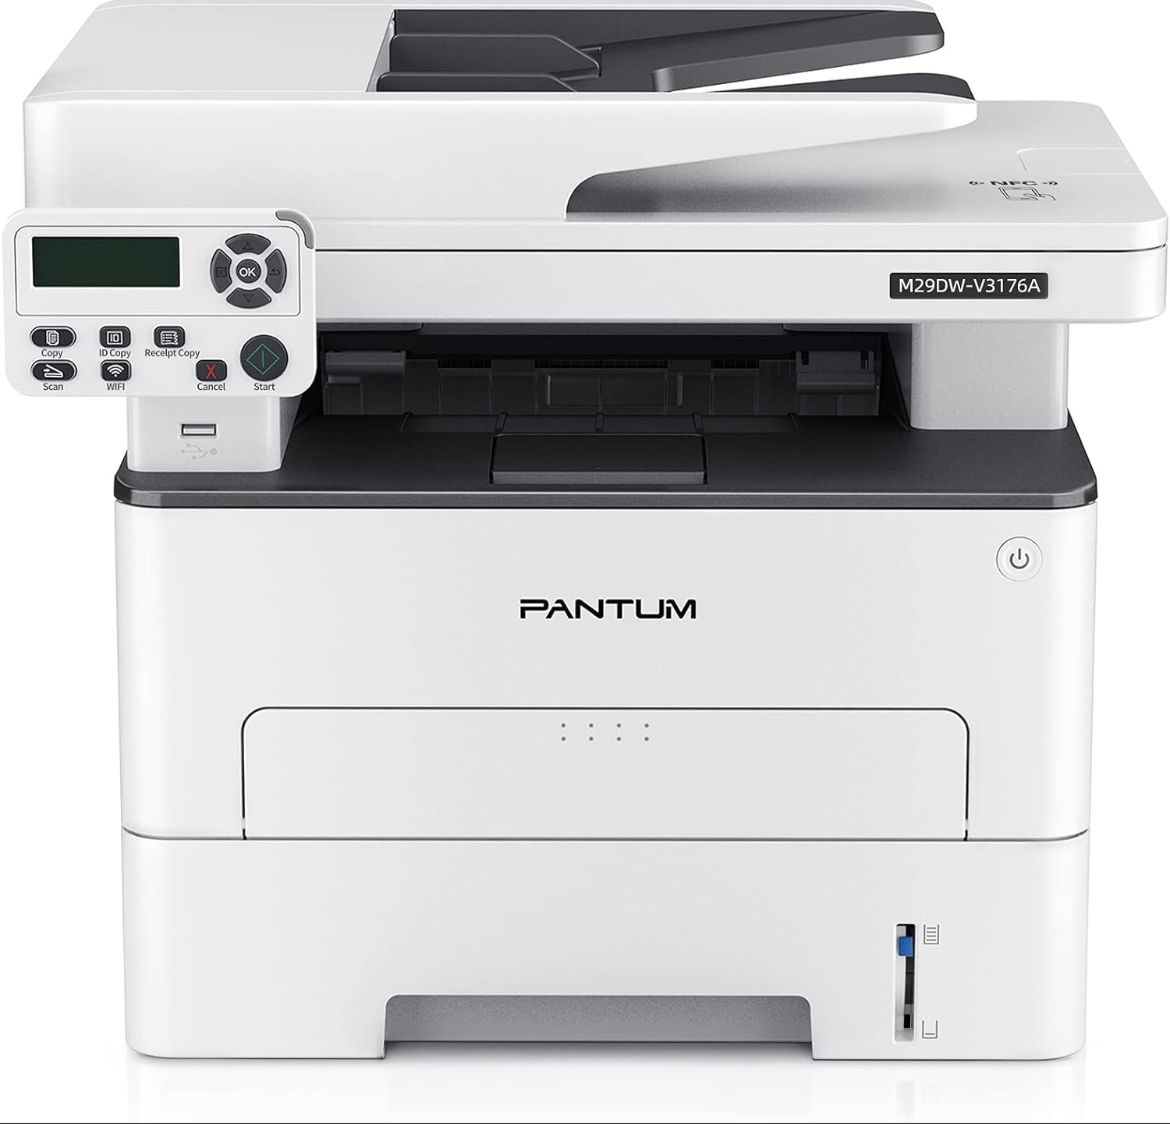 Pantum M29DW Multifunction (Print Copy Scan) All-in-One Monochrome Laser Printer with Wireless Duplex Two-Sided Printing, Networking & USB 2.0, 35PPM 